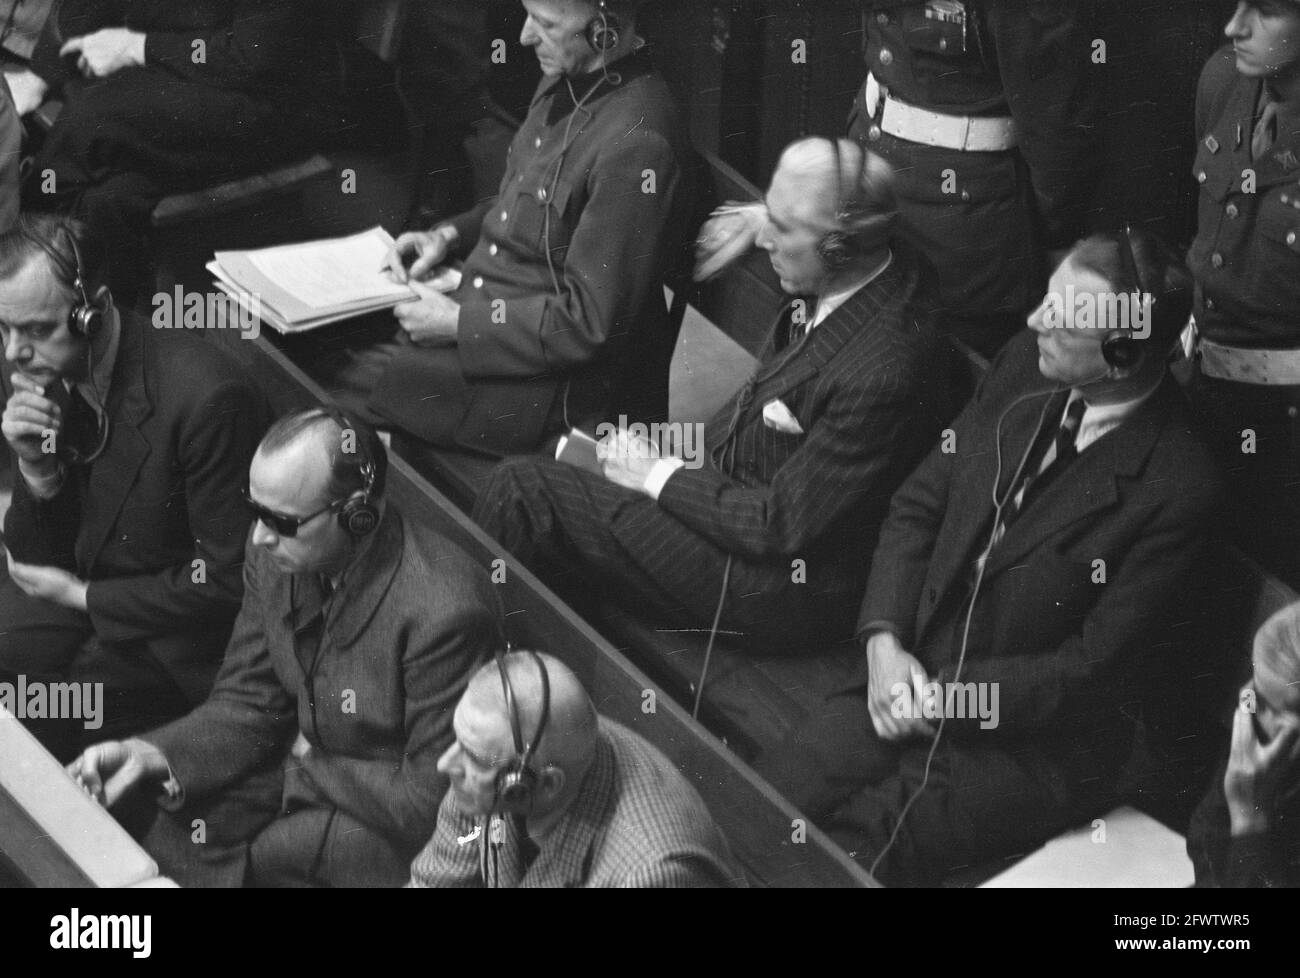 Nuremberg Trial. Accused; with glasses Arthur Seyss-Inquart, left Franz von Papen, December 4, 1945, war criminals, trials, justice, second world war, The Netherlands, 20th century press agency photo, news to remember, documentary, historic photography 1945-1990, visual stories, human history of the Twentieth Century, capturing moments in time Stock Photo